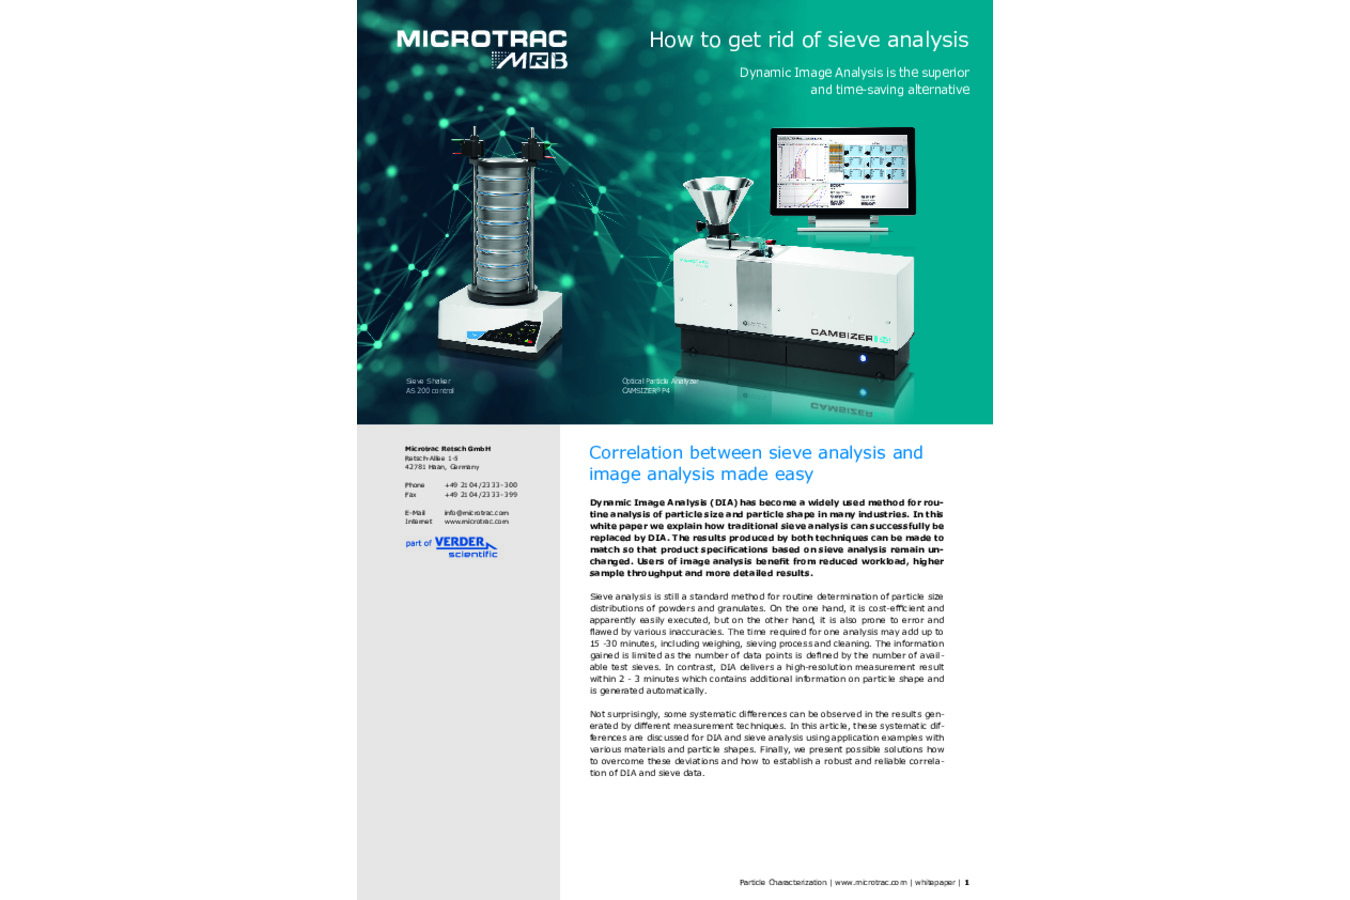 The easy way to correlation between sieve analysis and image analysis This white paper describes how Dynamic Image Analysis can effectively replace sieve analysis and significantly reduce the user’s workload.